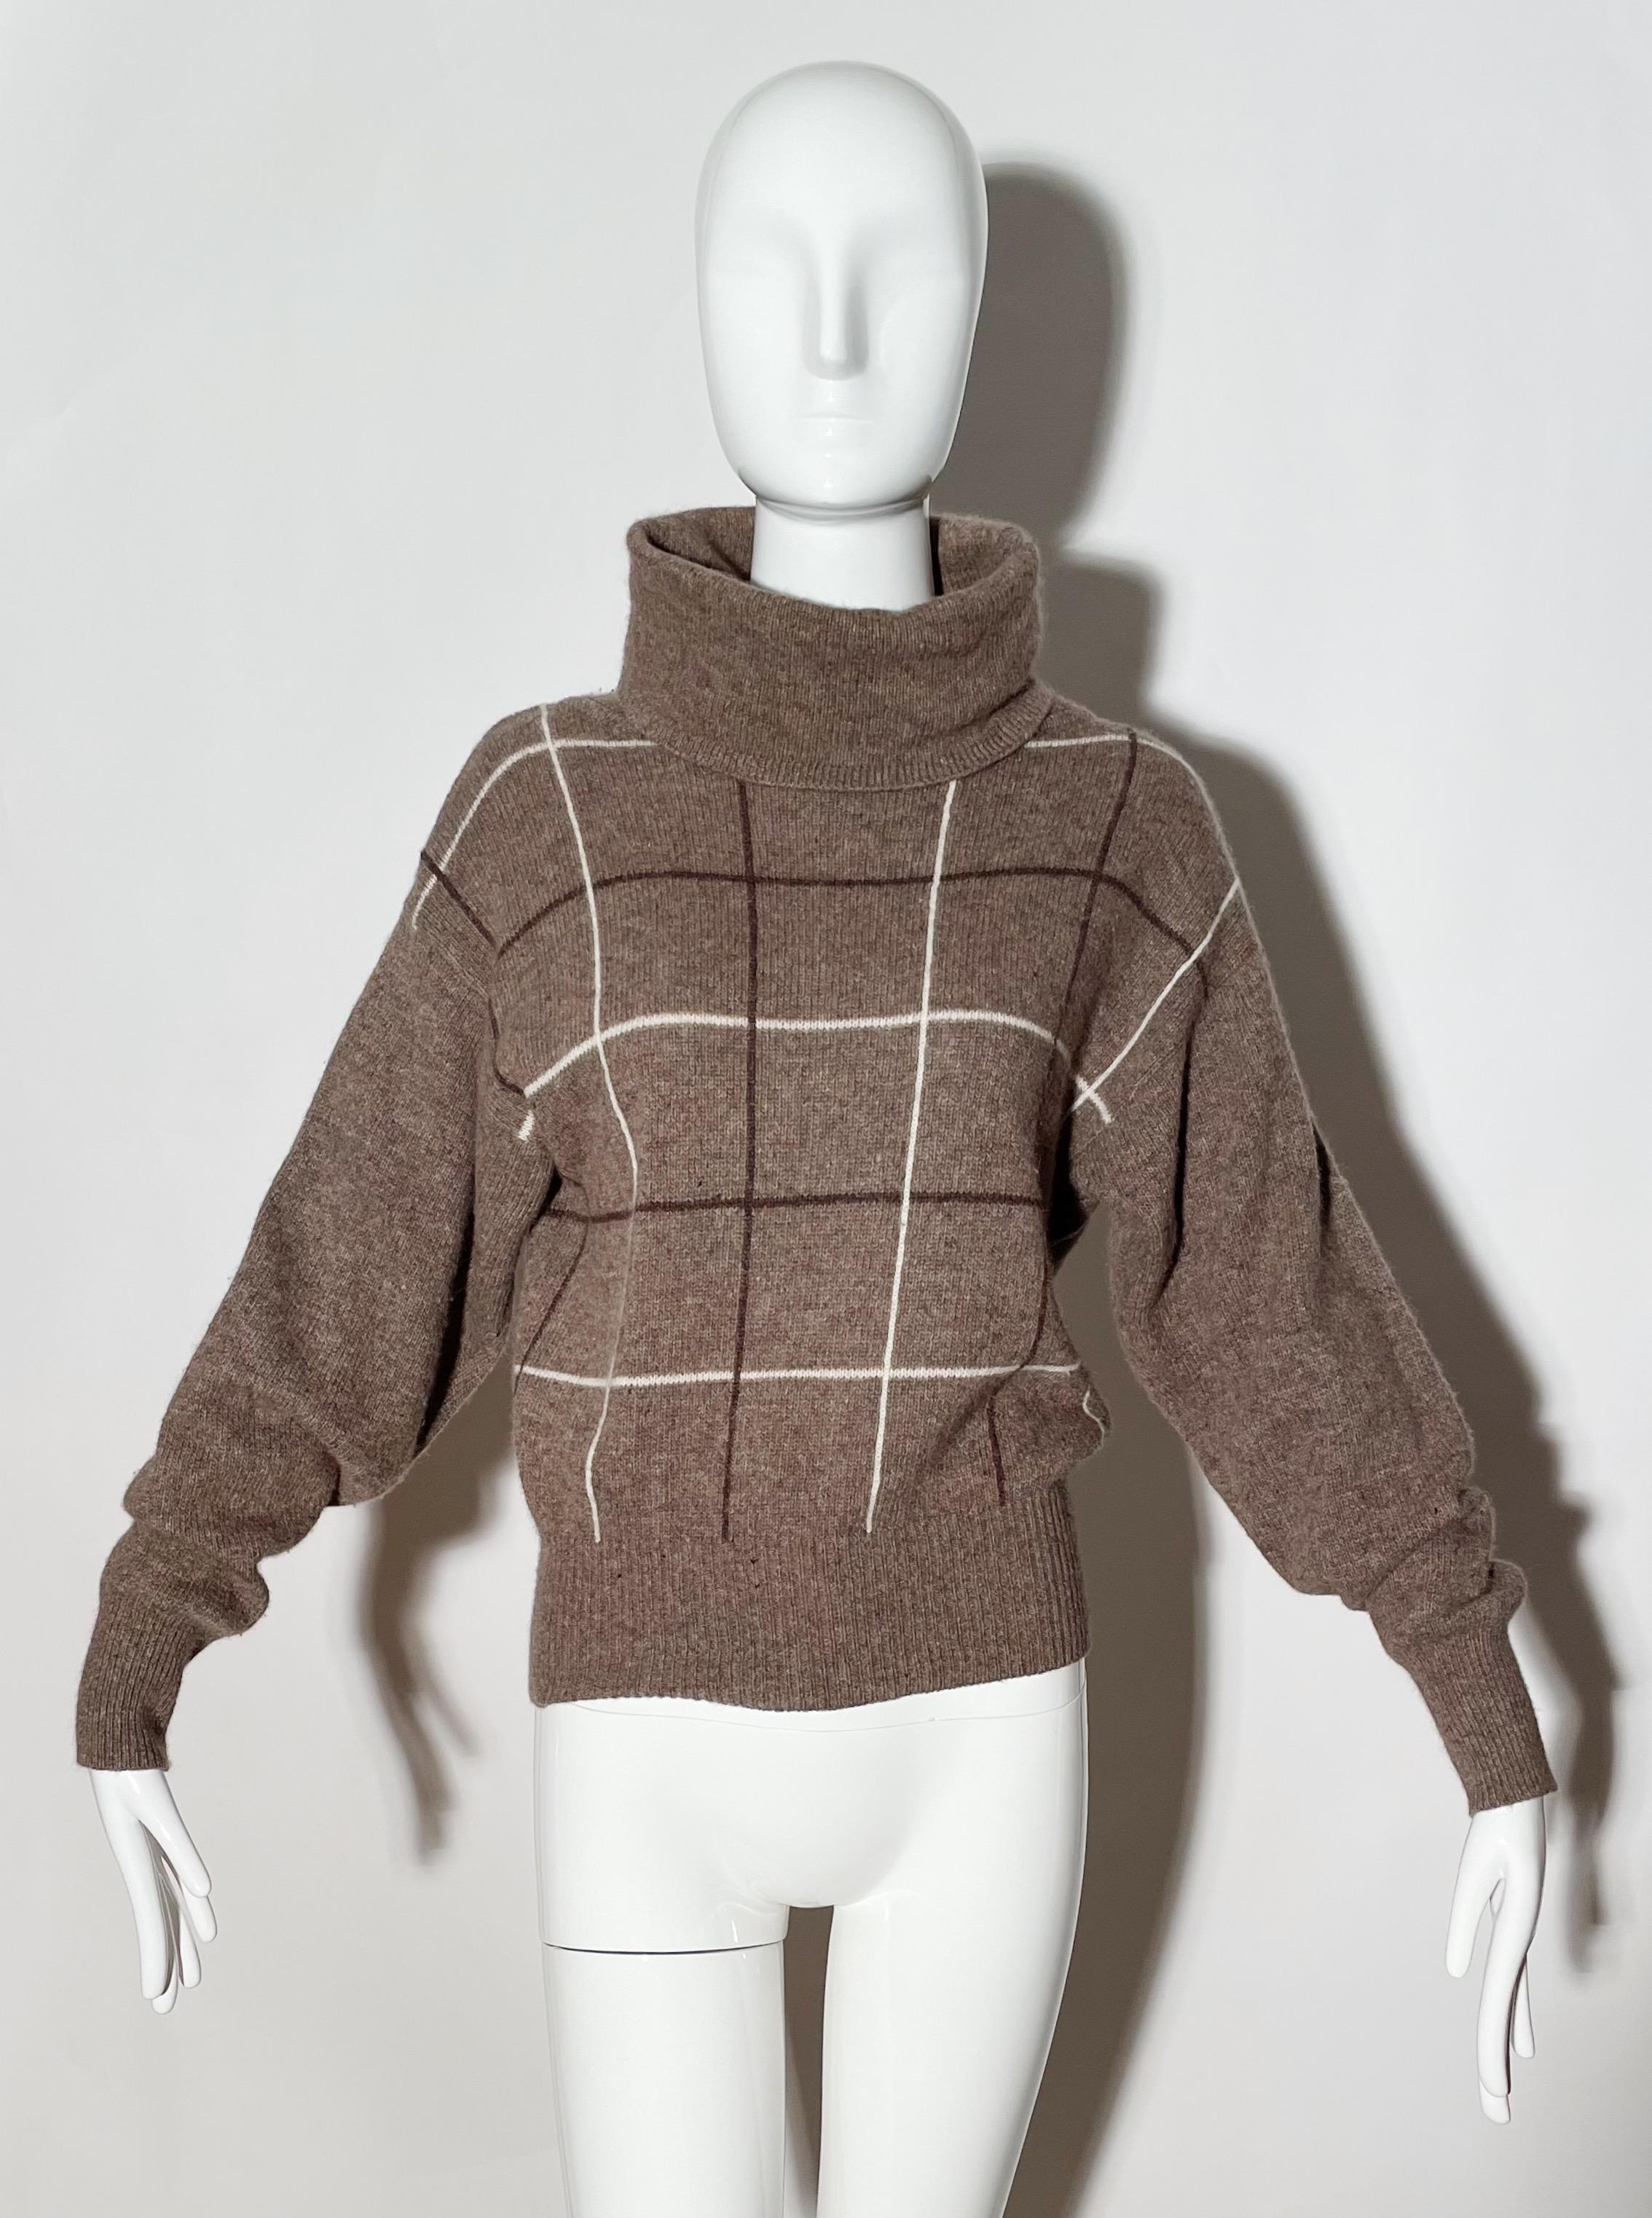 Brown plaid sweater. Turtleneck. Pullover style. Lambswool and angora. Made in Hong Kong. 
*Condition: excellent vintage condition. No visible flaws.

Measurements Taken Laying Flat (inches)—
Shoulder to Shoulder: 21 in.
Bust: 34 in.
Sleeve Length: